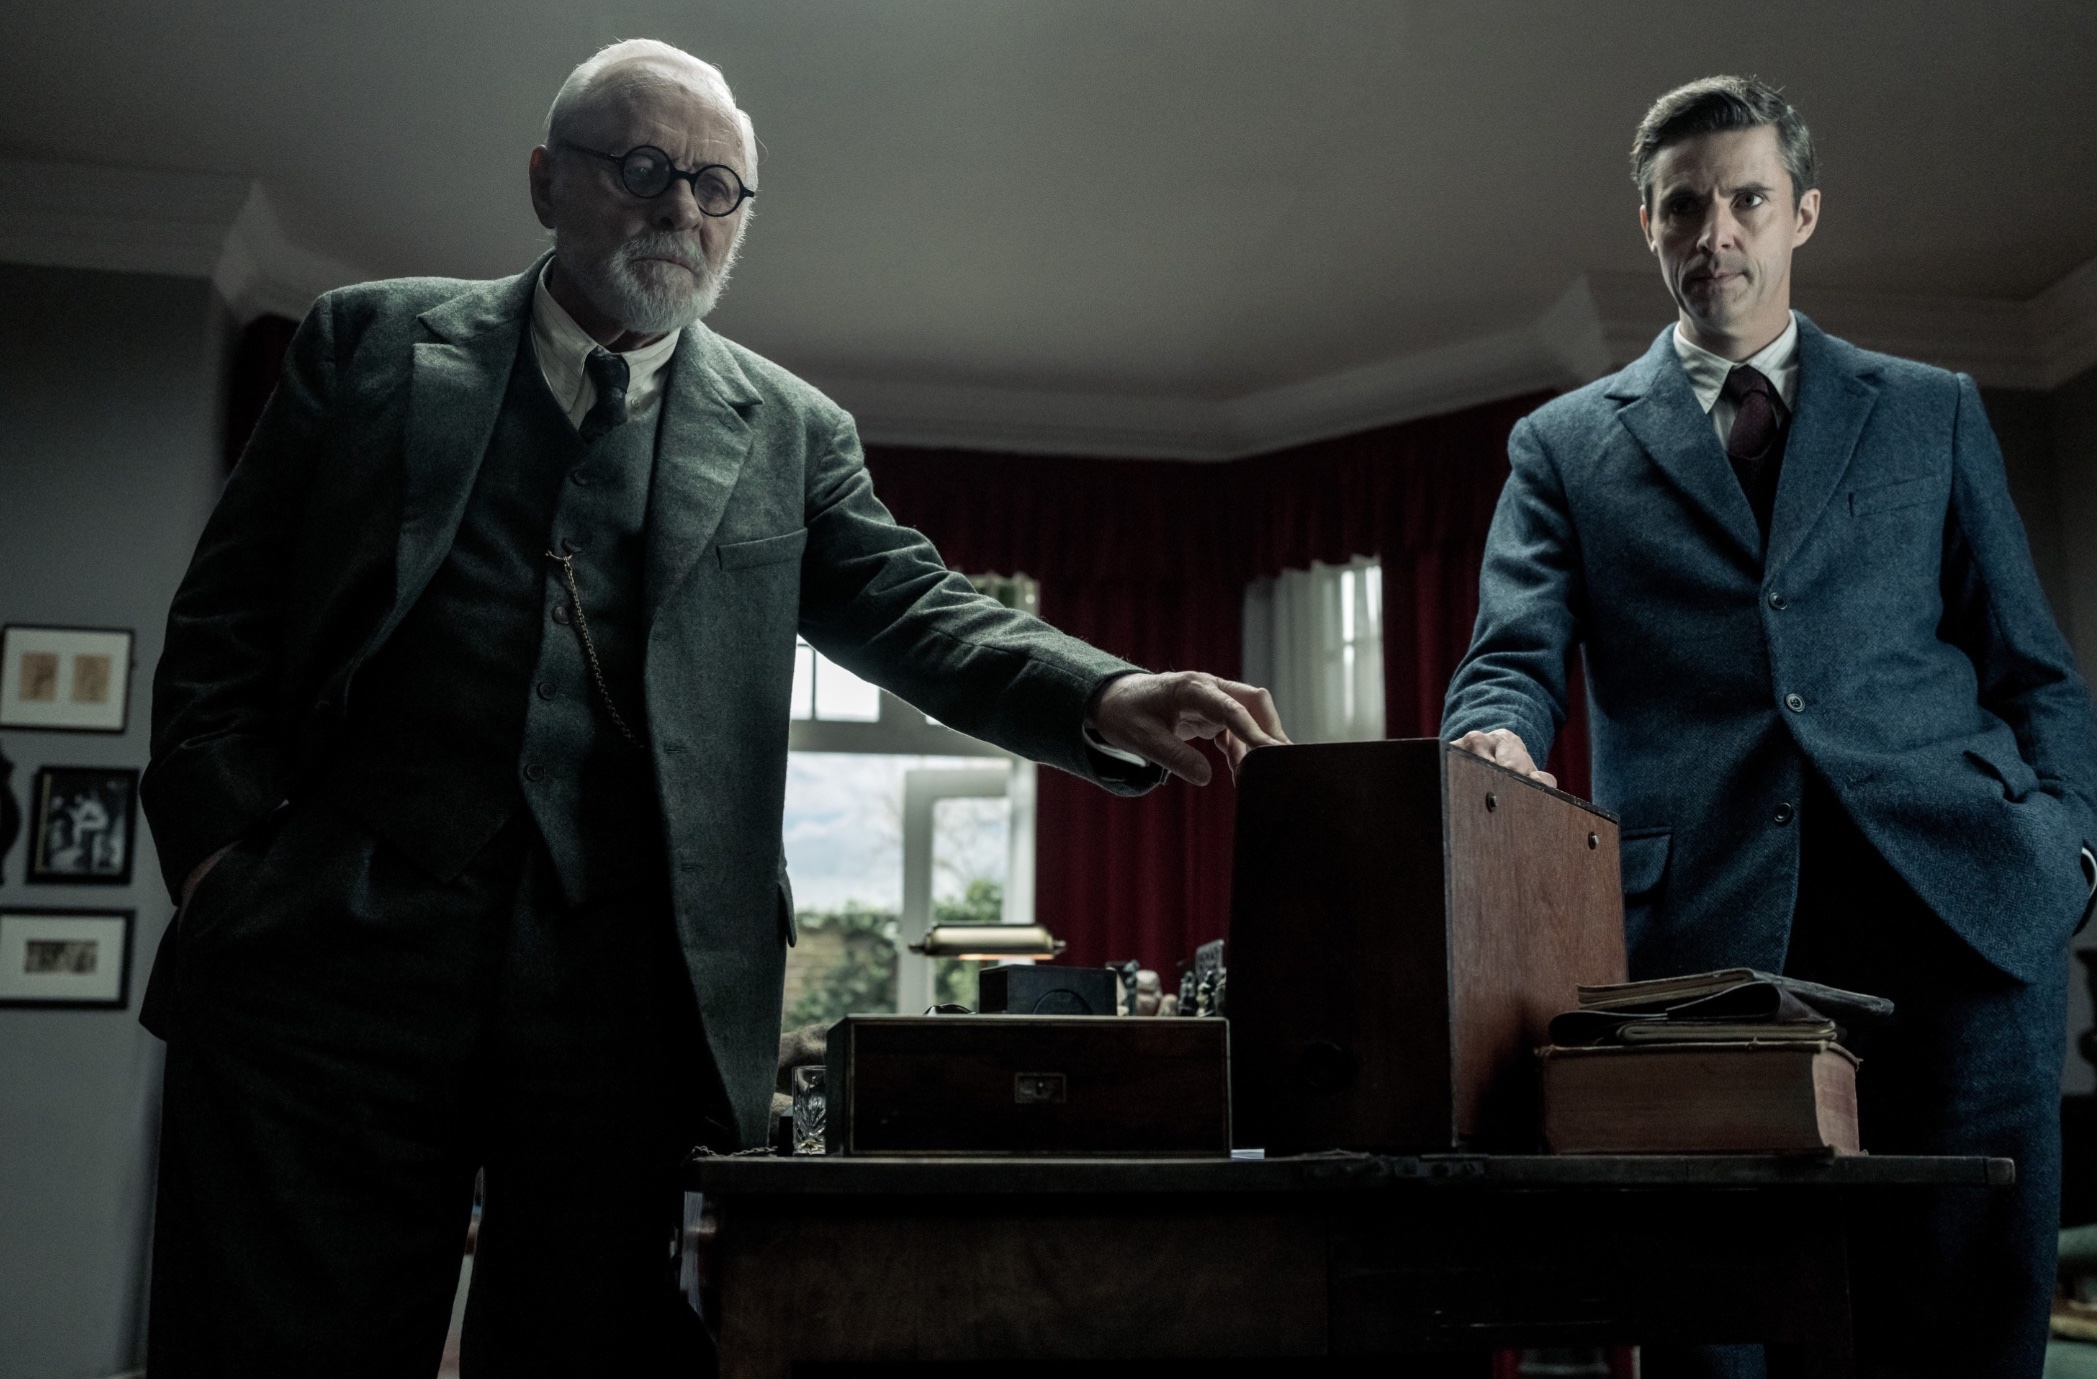 Freud (Anthony Hopkins) and CS Lewis (Matthew Goode) both touch a box in the middle of an old room in Freud’s Last Session